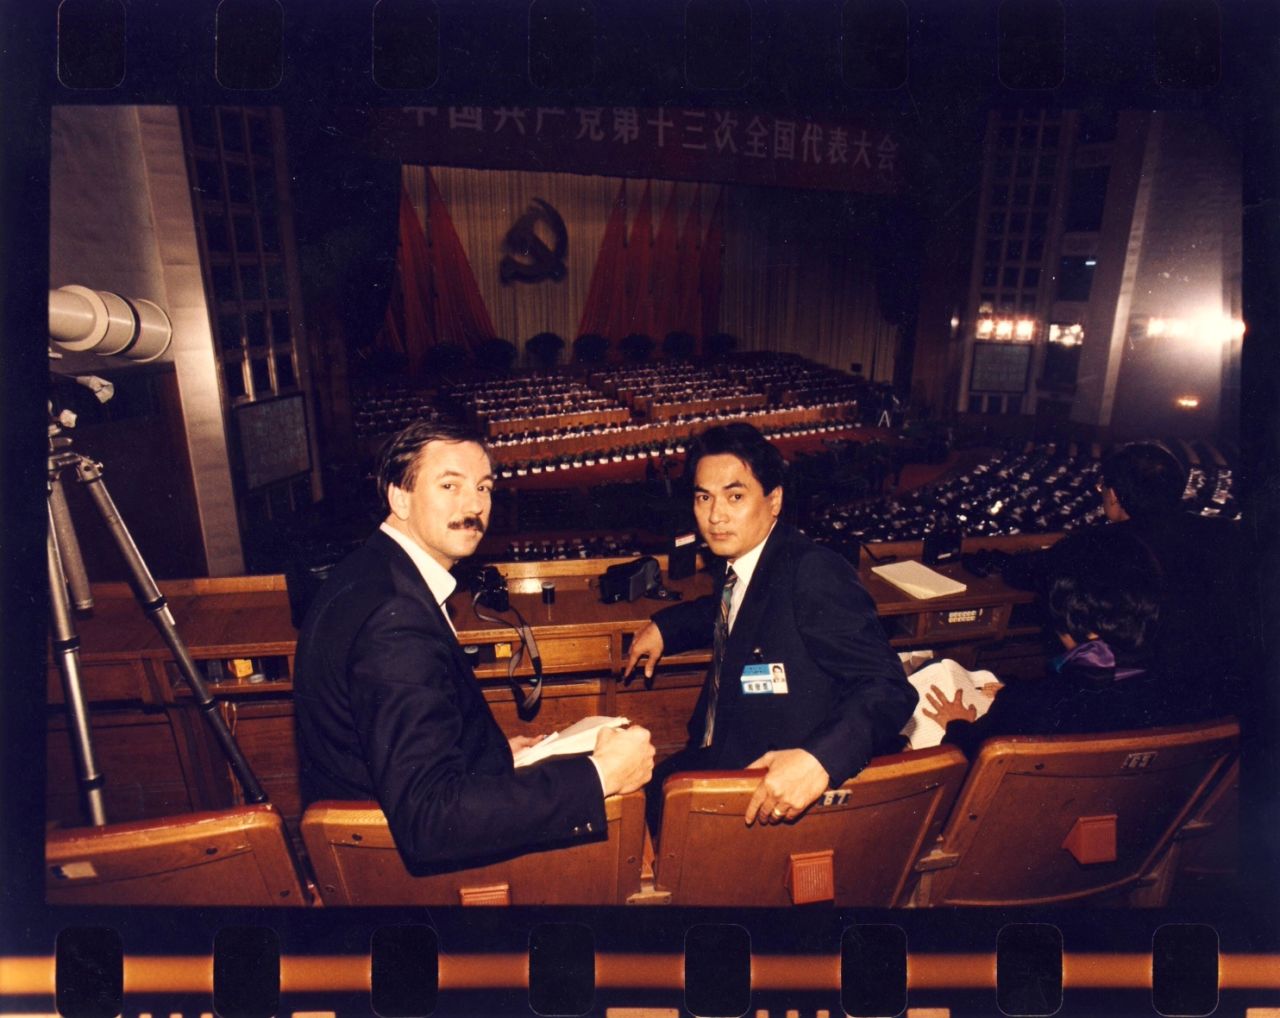 FlorCruz and TIME colleague Richard Hornik cover the 1987 Communist Party National Congress, the first ever opened to foreign correspondents.